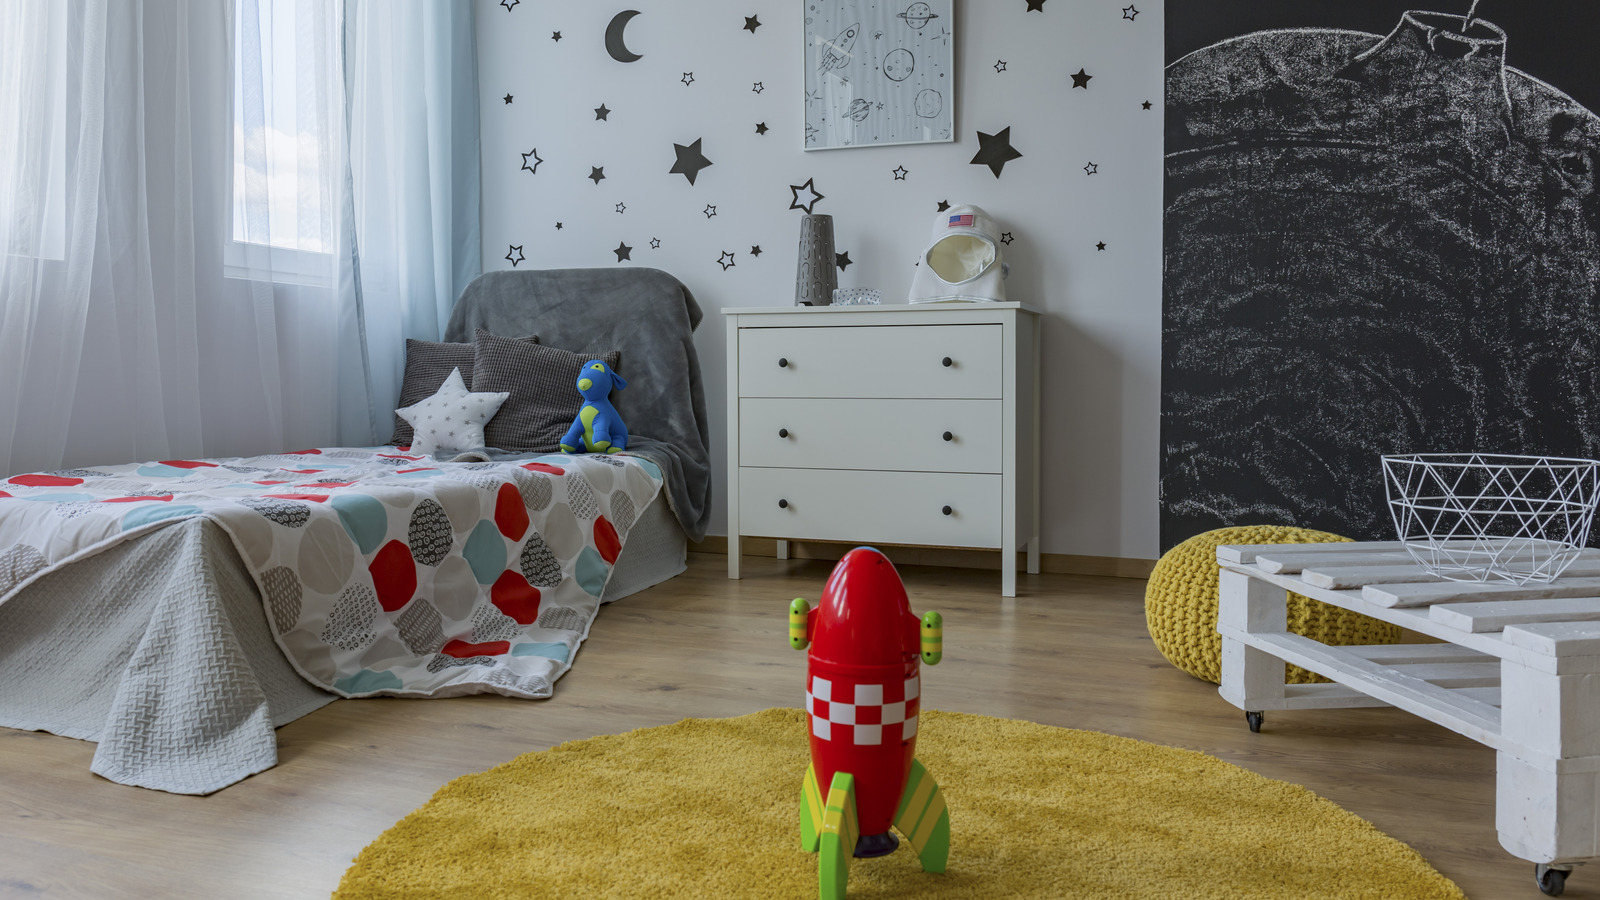 20 Ideas For Decorating Your Kid's Bedroom With A Space Theme